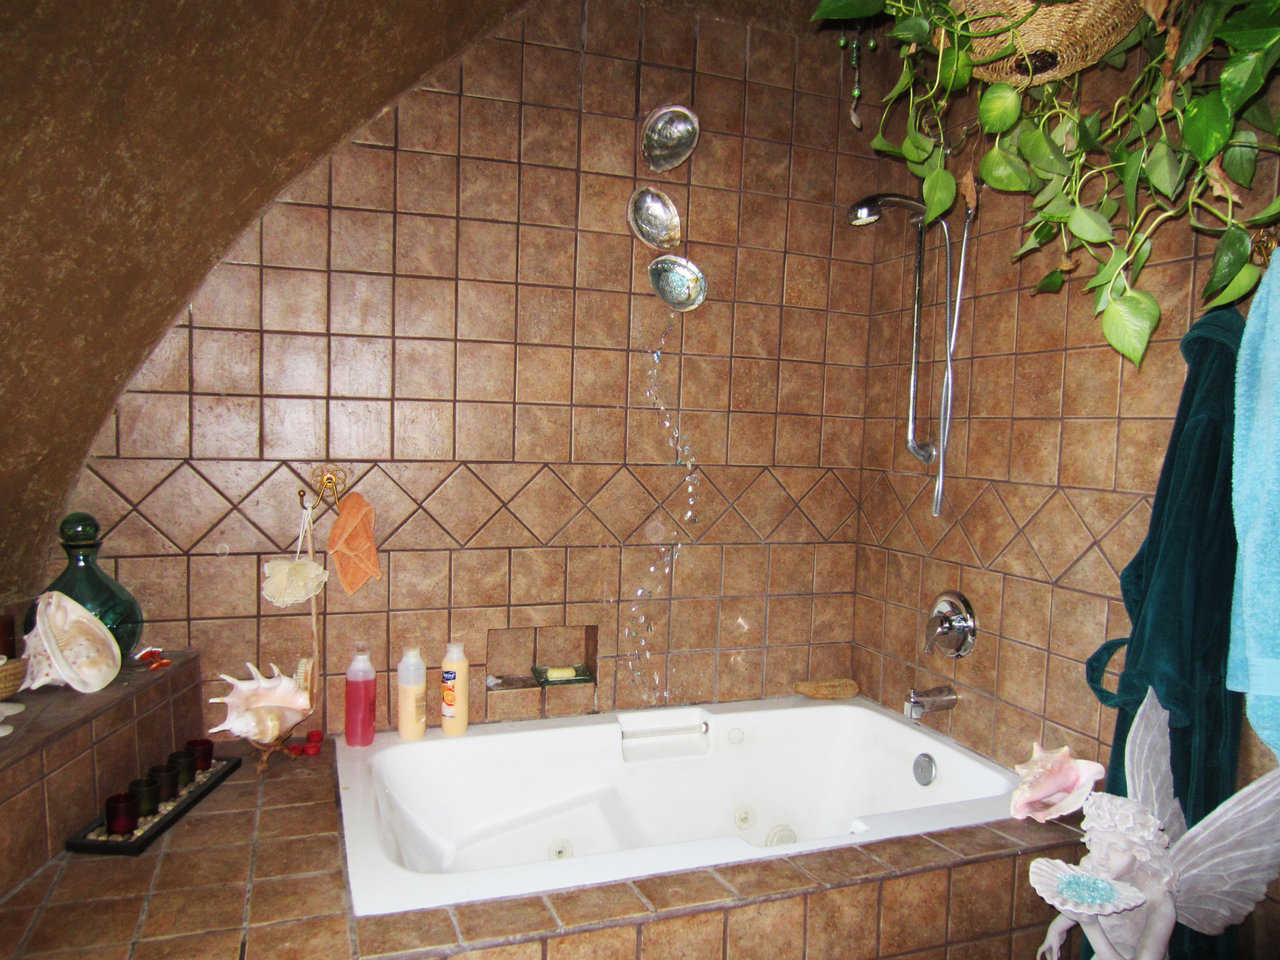 This bath was built by Lori. Note the beautiful tile work she did. This is a lovely home and a secure home — fire safe, earthquake safe — just simply safe.